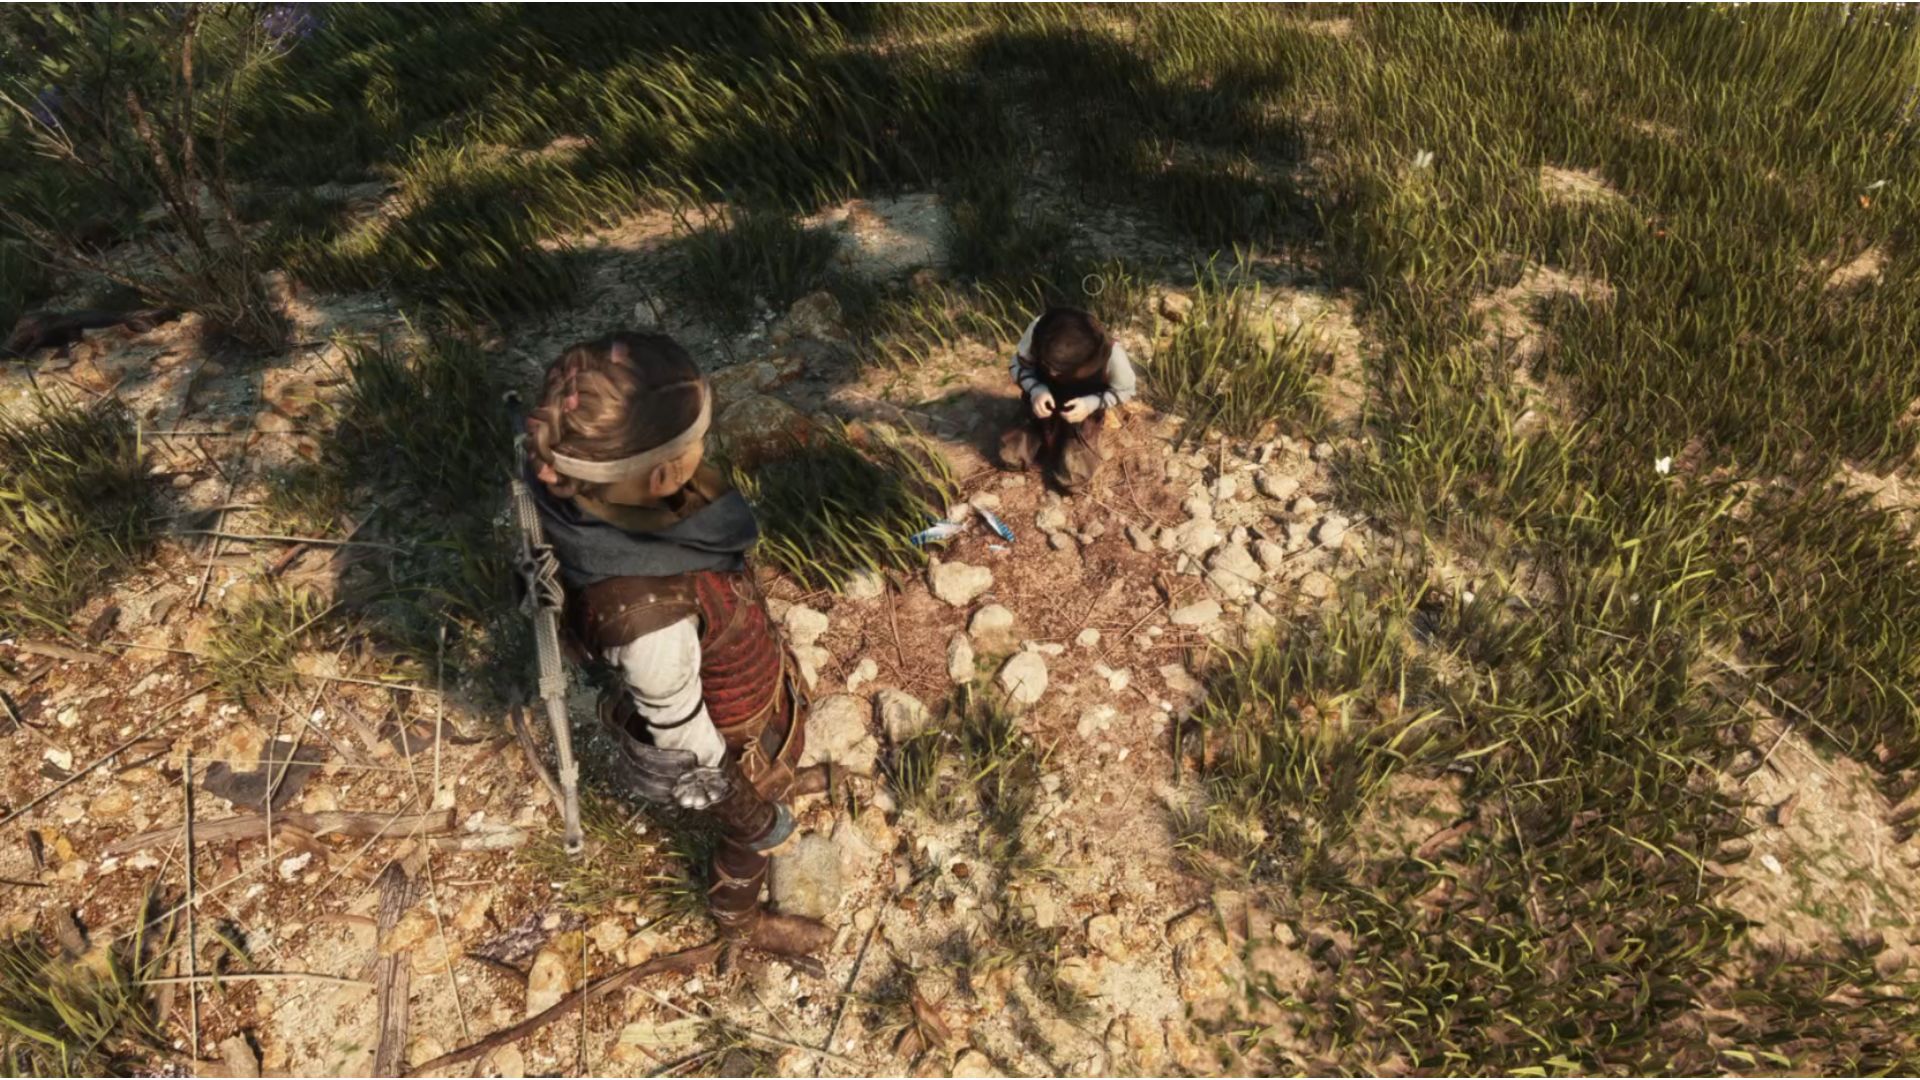 A Plague Tale Requiem Collectibles: Hugo can be seen crouching looking at the feather